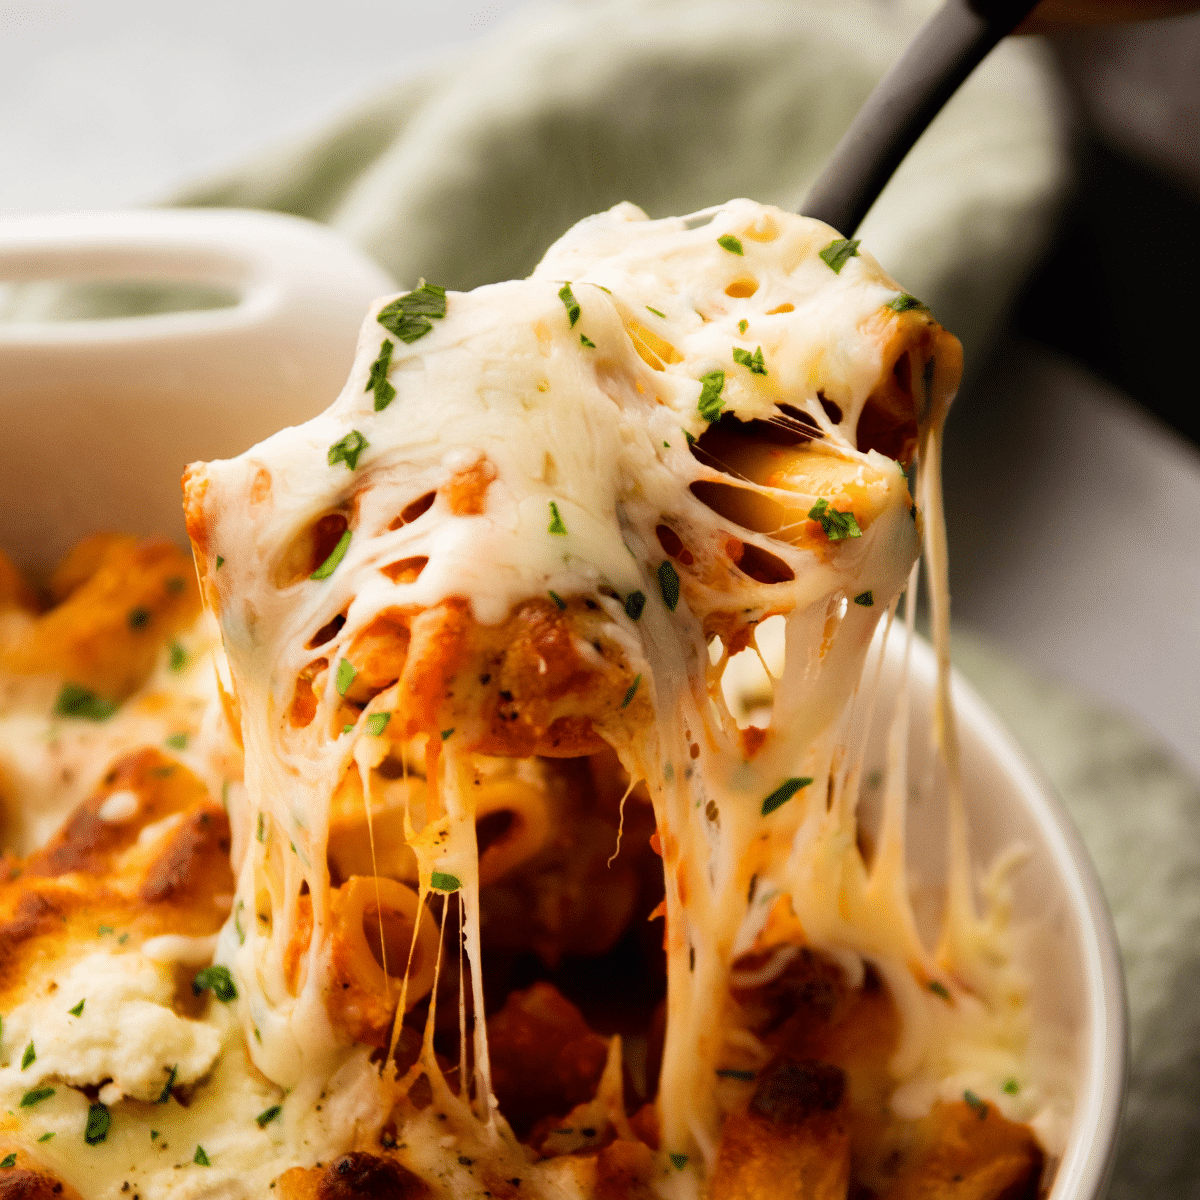 Spoon lifting baked ziti out of a white baking dish.